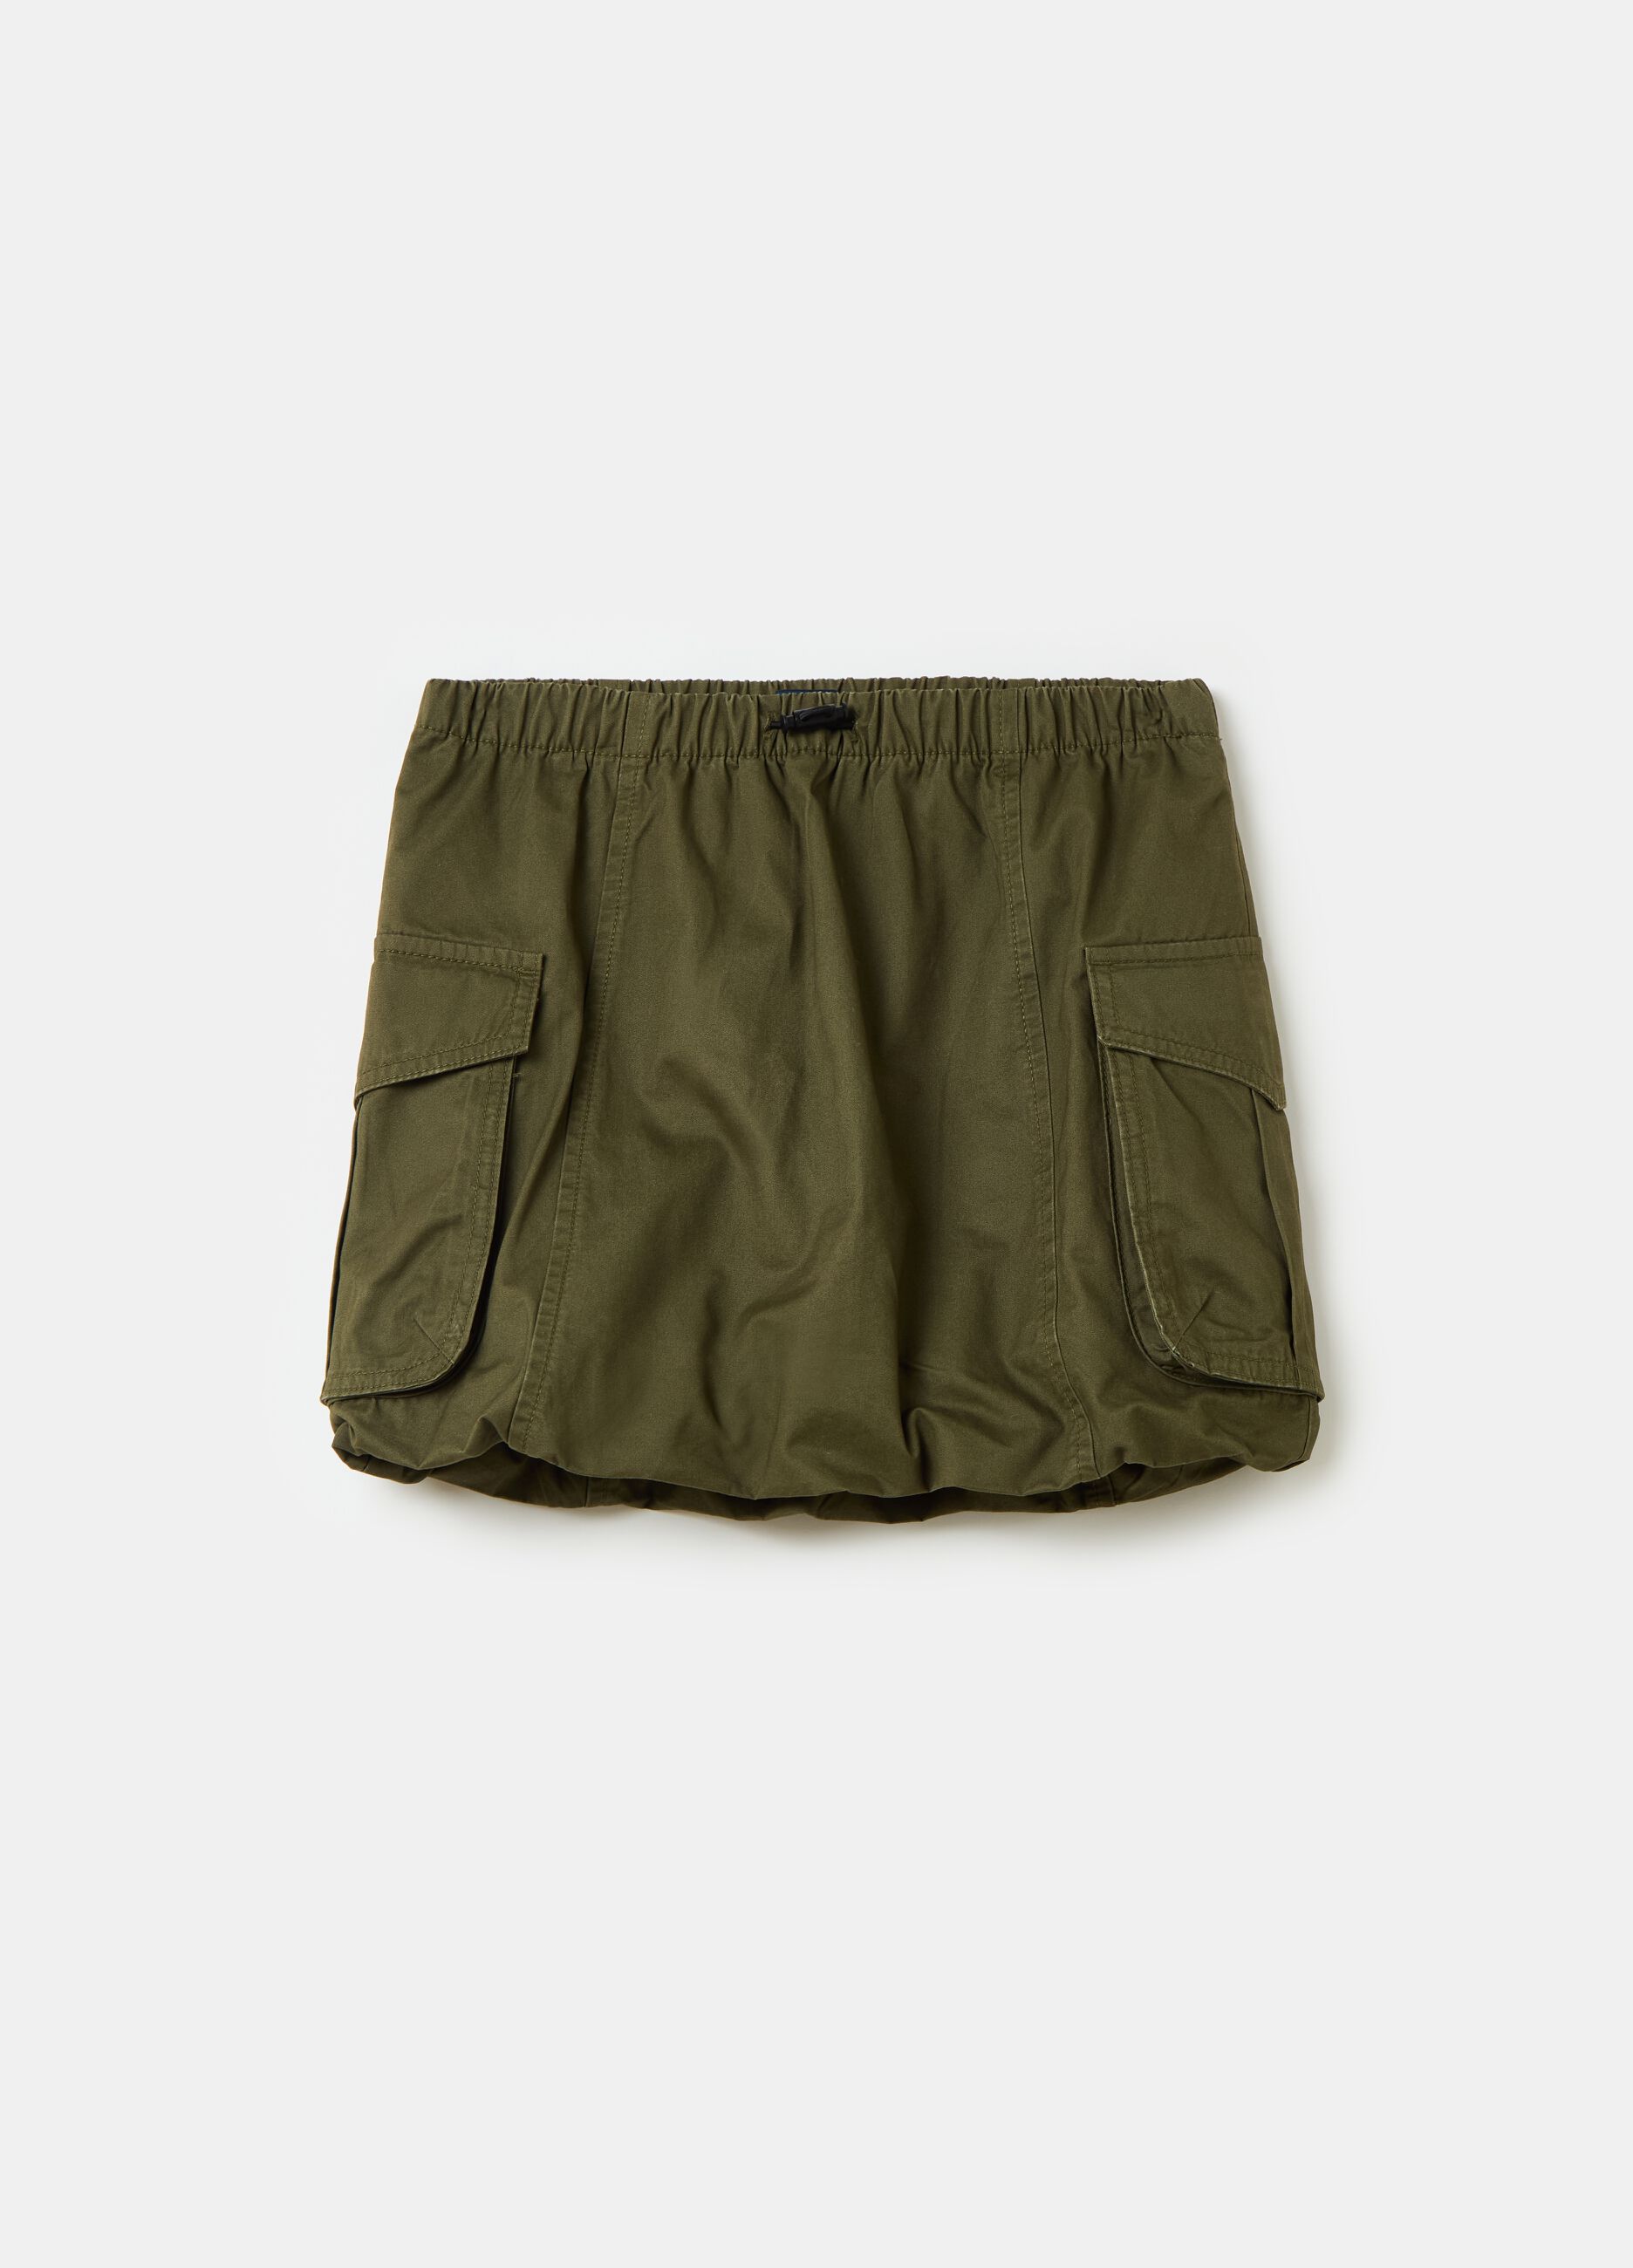 Cotton cargo skirt with drawstring